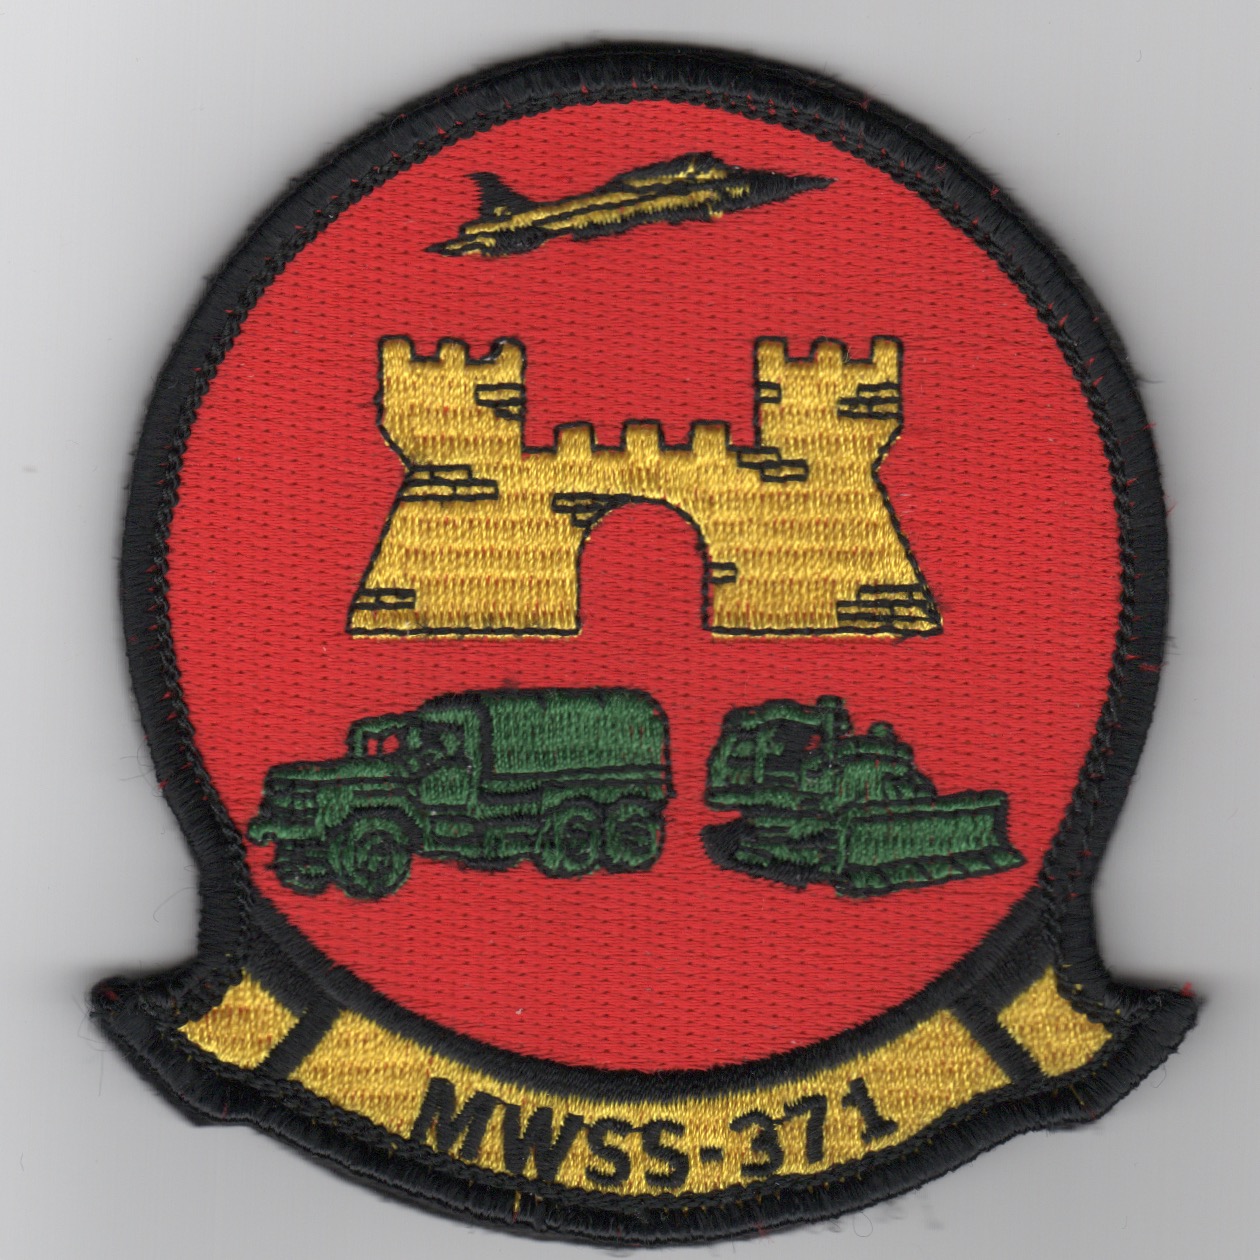 MWSS-371 Squadron Patch (Red)